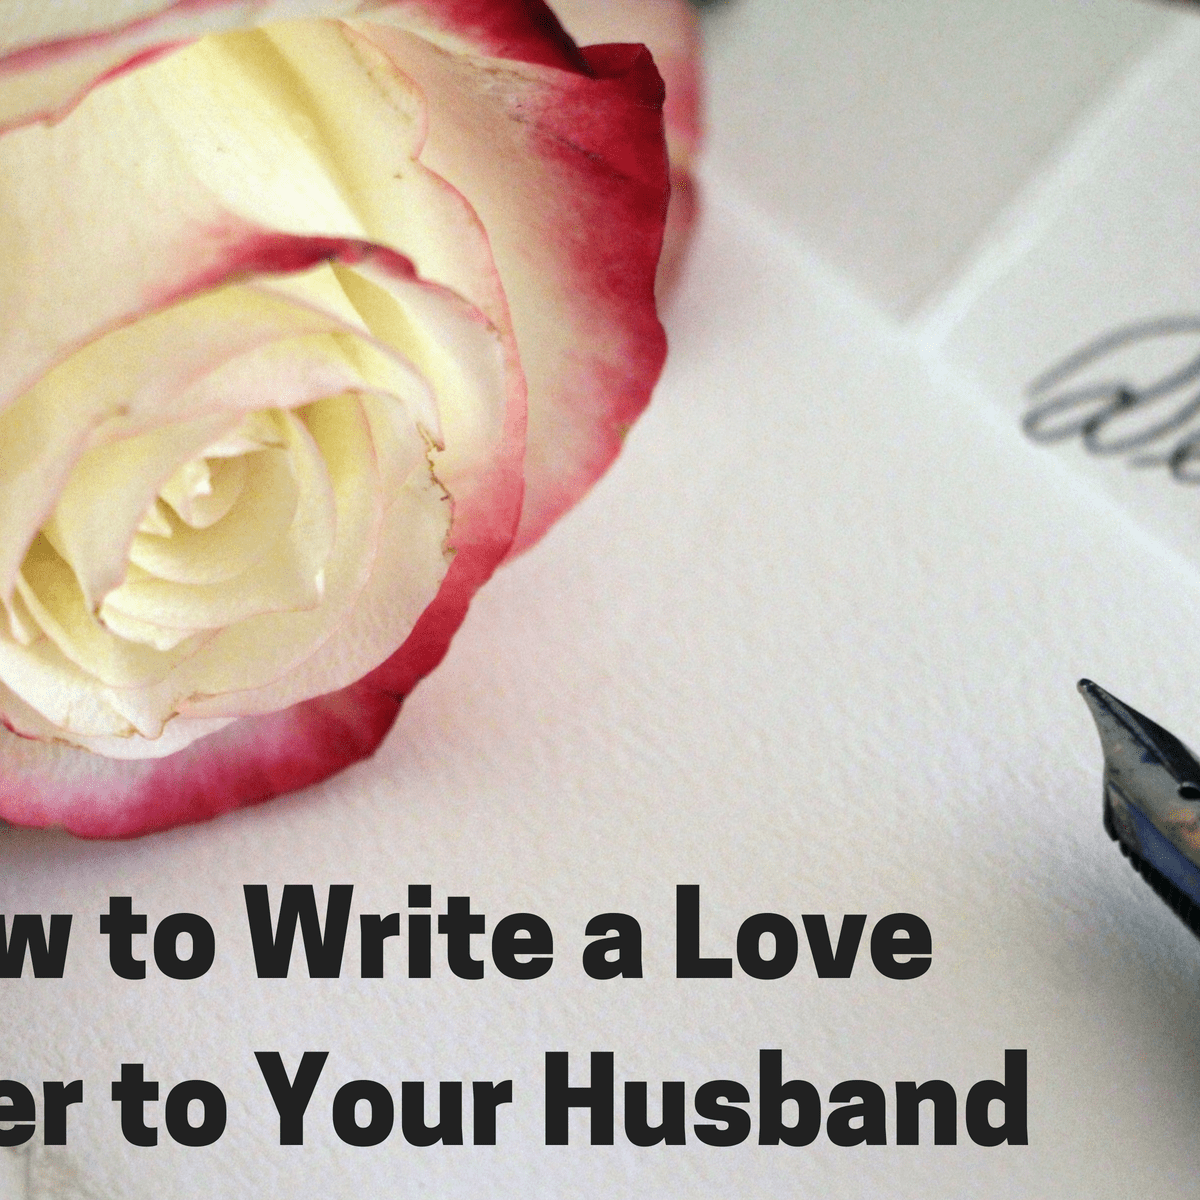 16 Sample Love Letters to Your Husband or Boyfriend - PairedLife